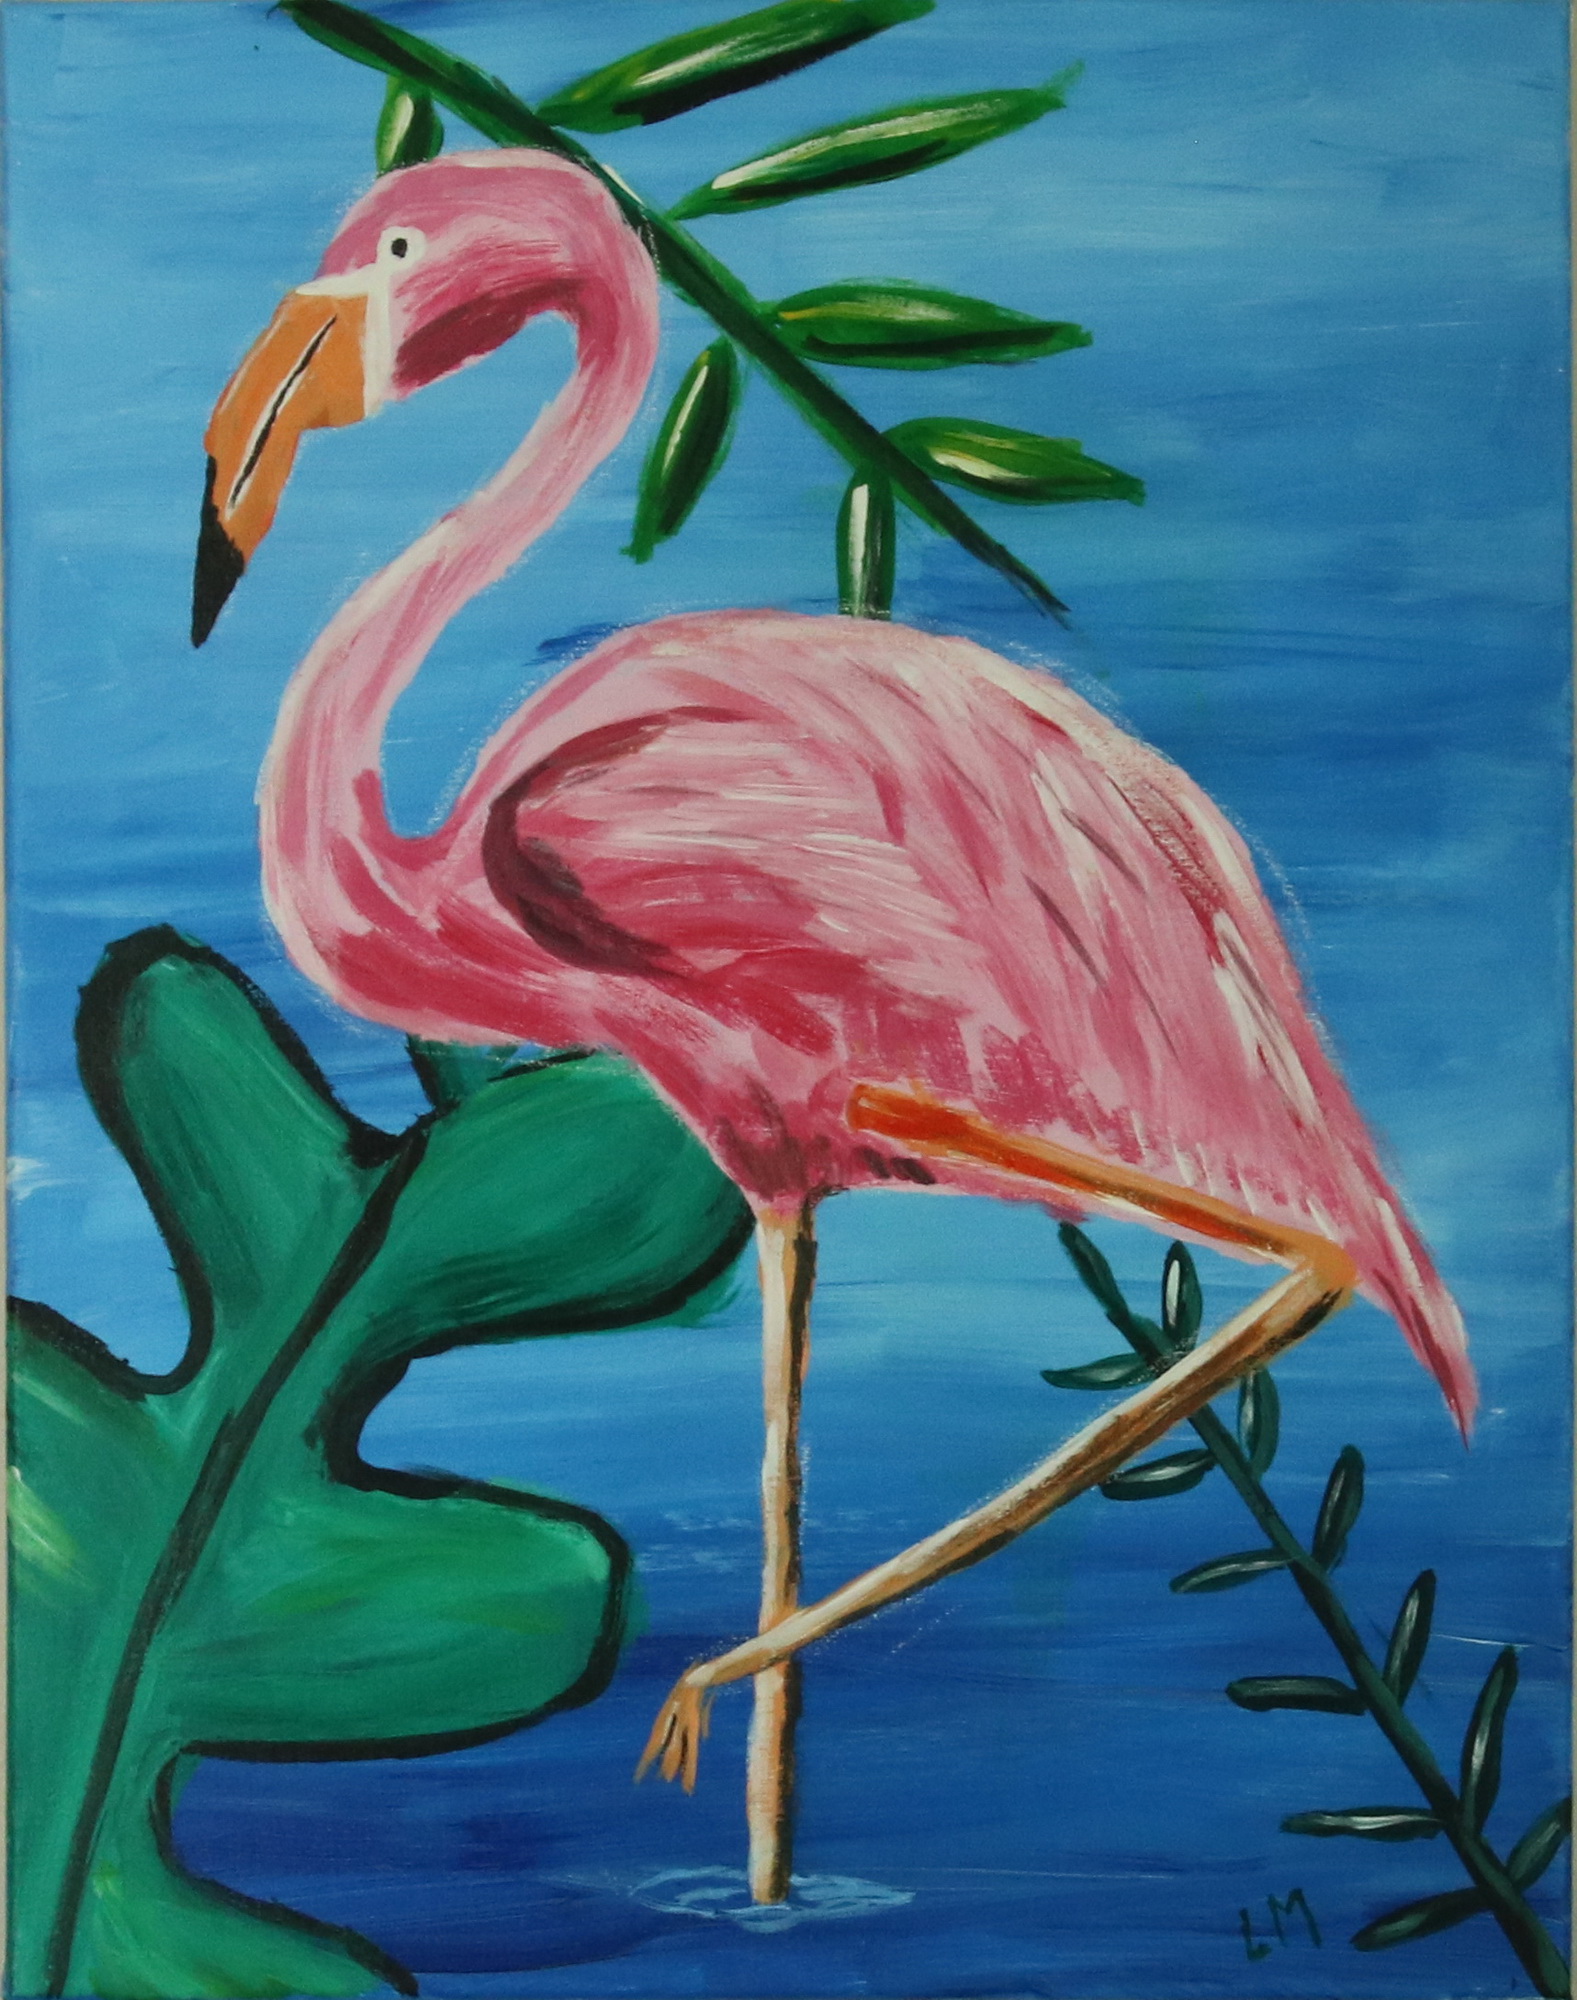 Flamingo - 2020<br/>The art studio partially reopened with "Take-out paintings" in which they provided the paint, canvas and a how-to video.